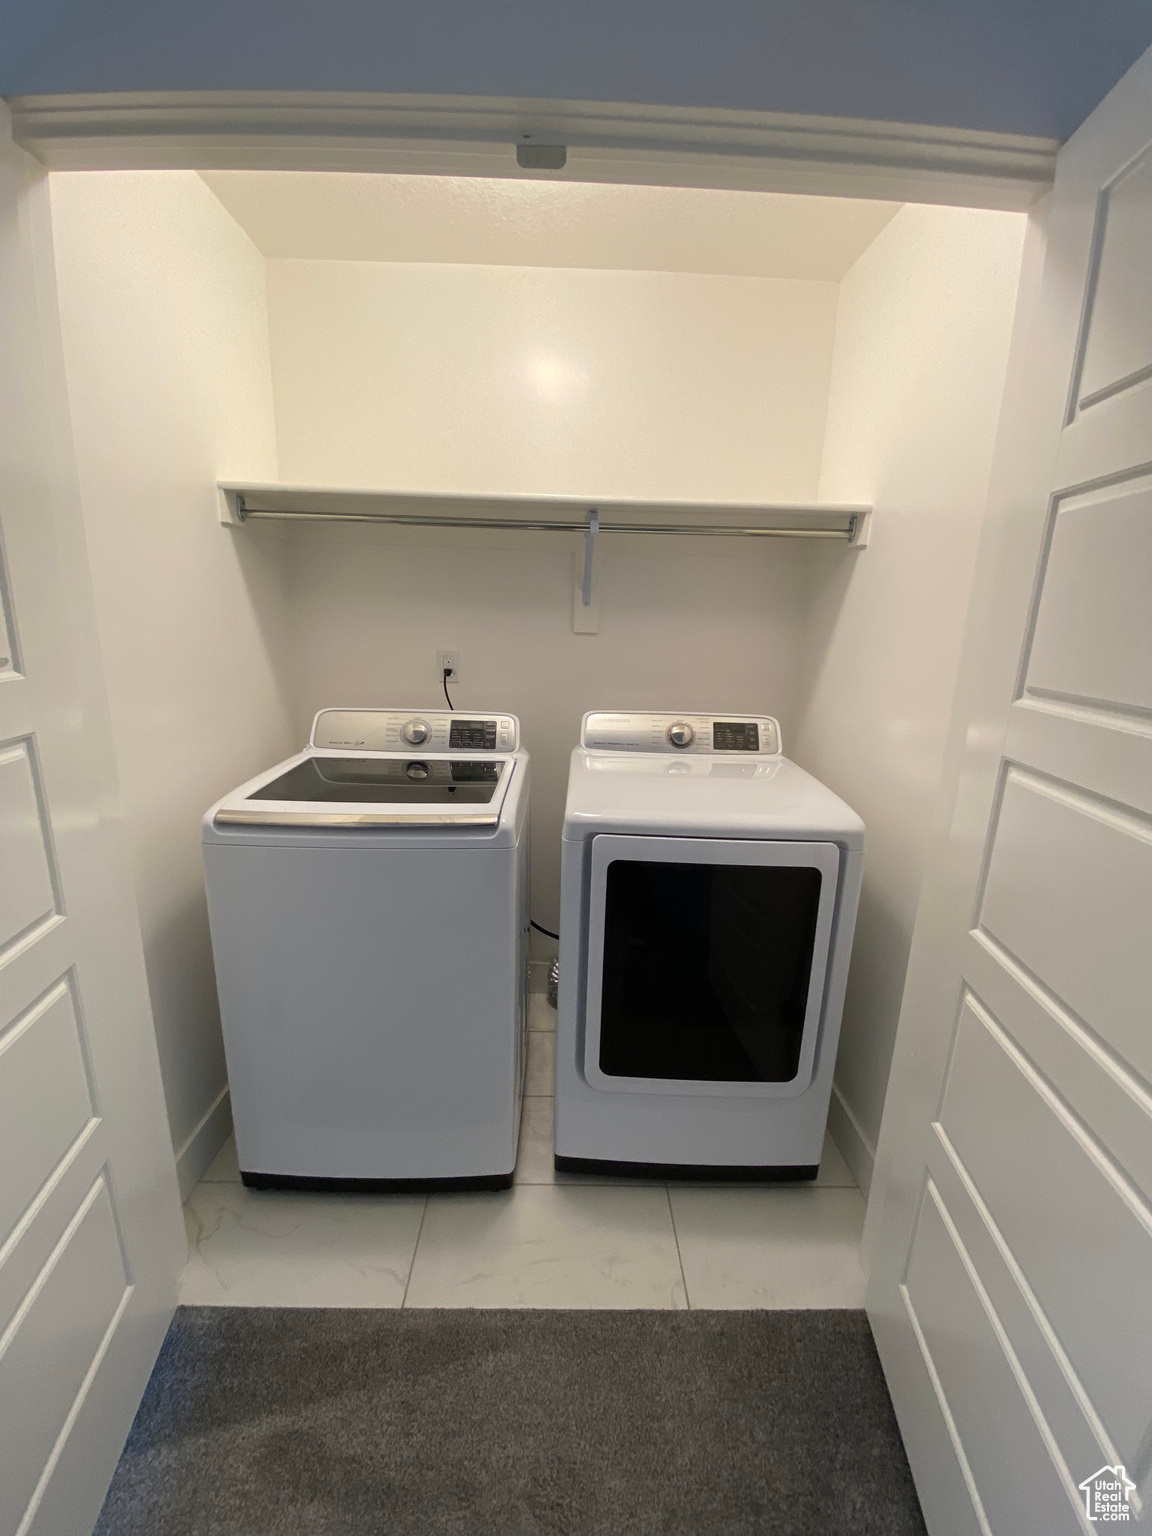 Laundry area with washer and dryer and light tile floors